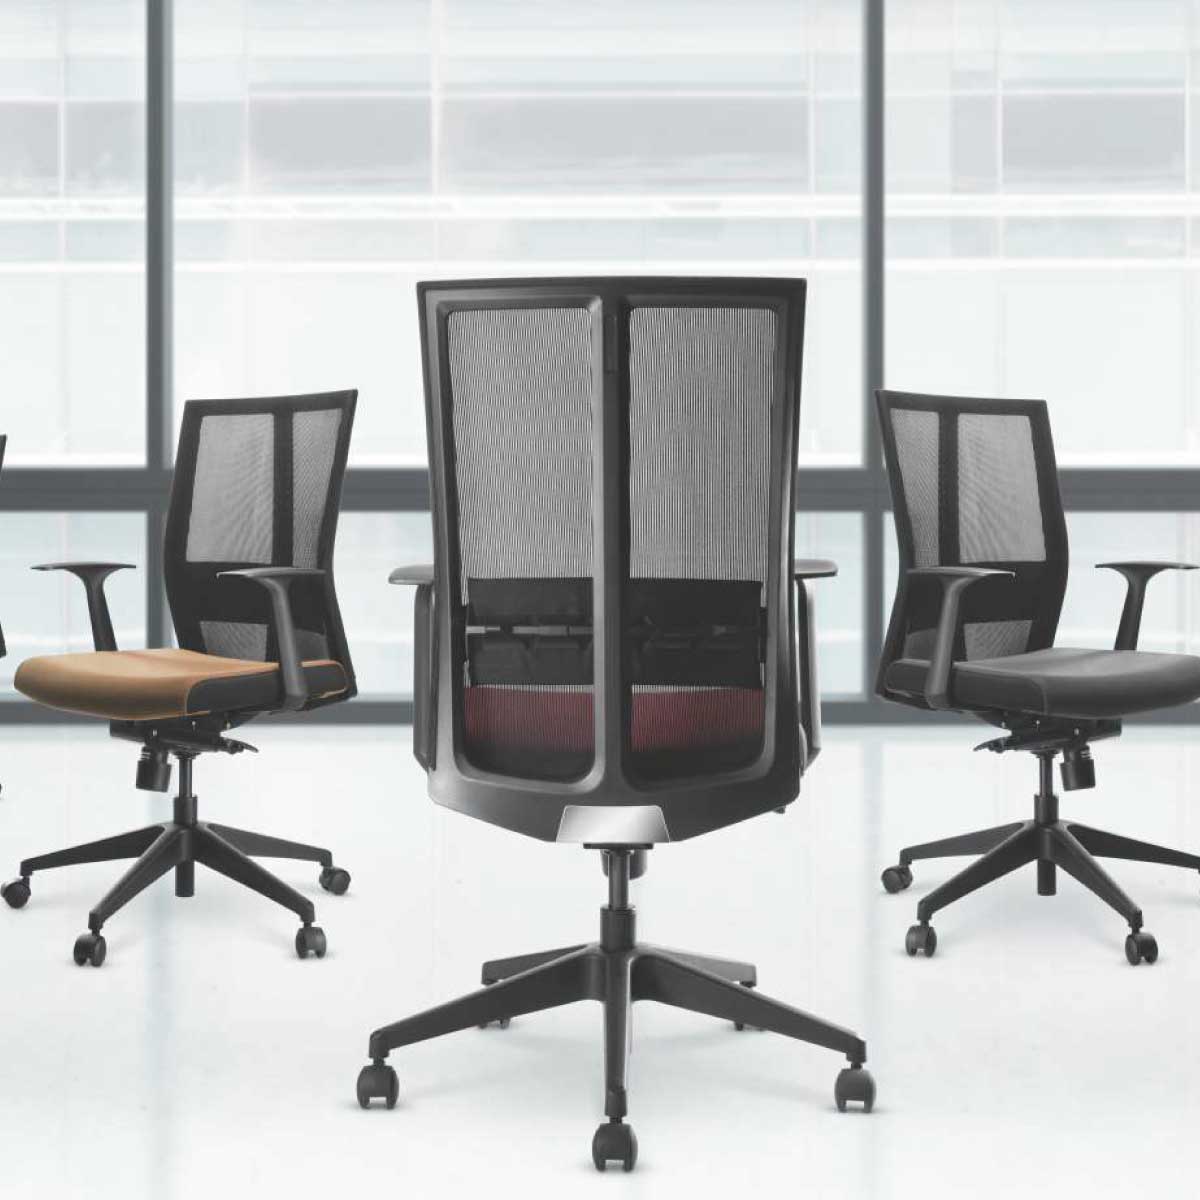 Visitor Chair Manufacturers, Suppliers in Nirman Vihar